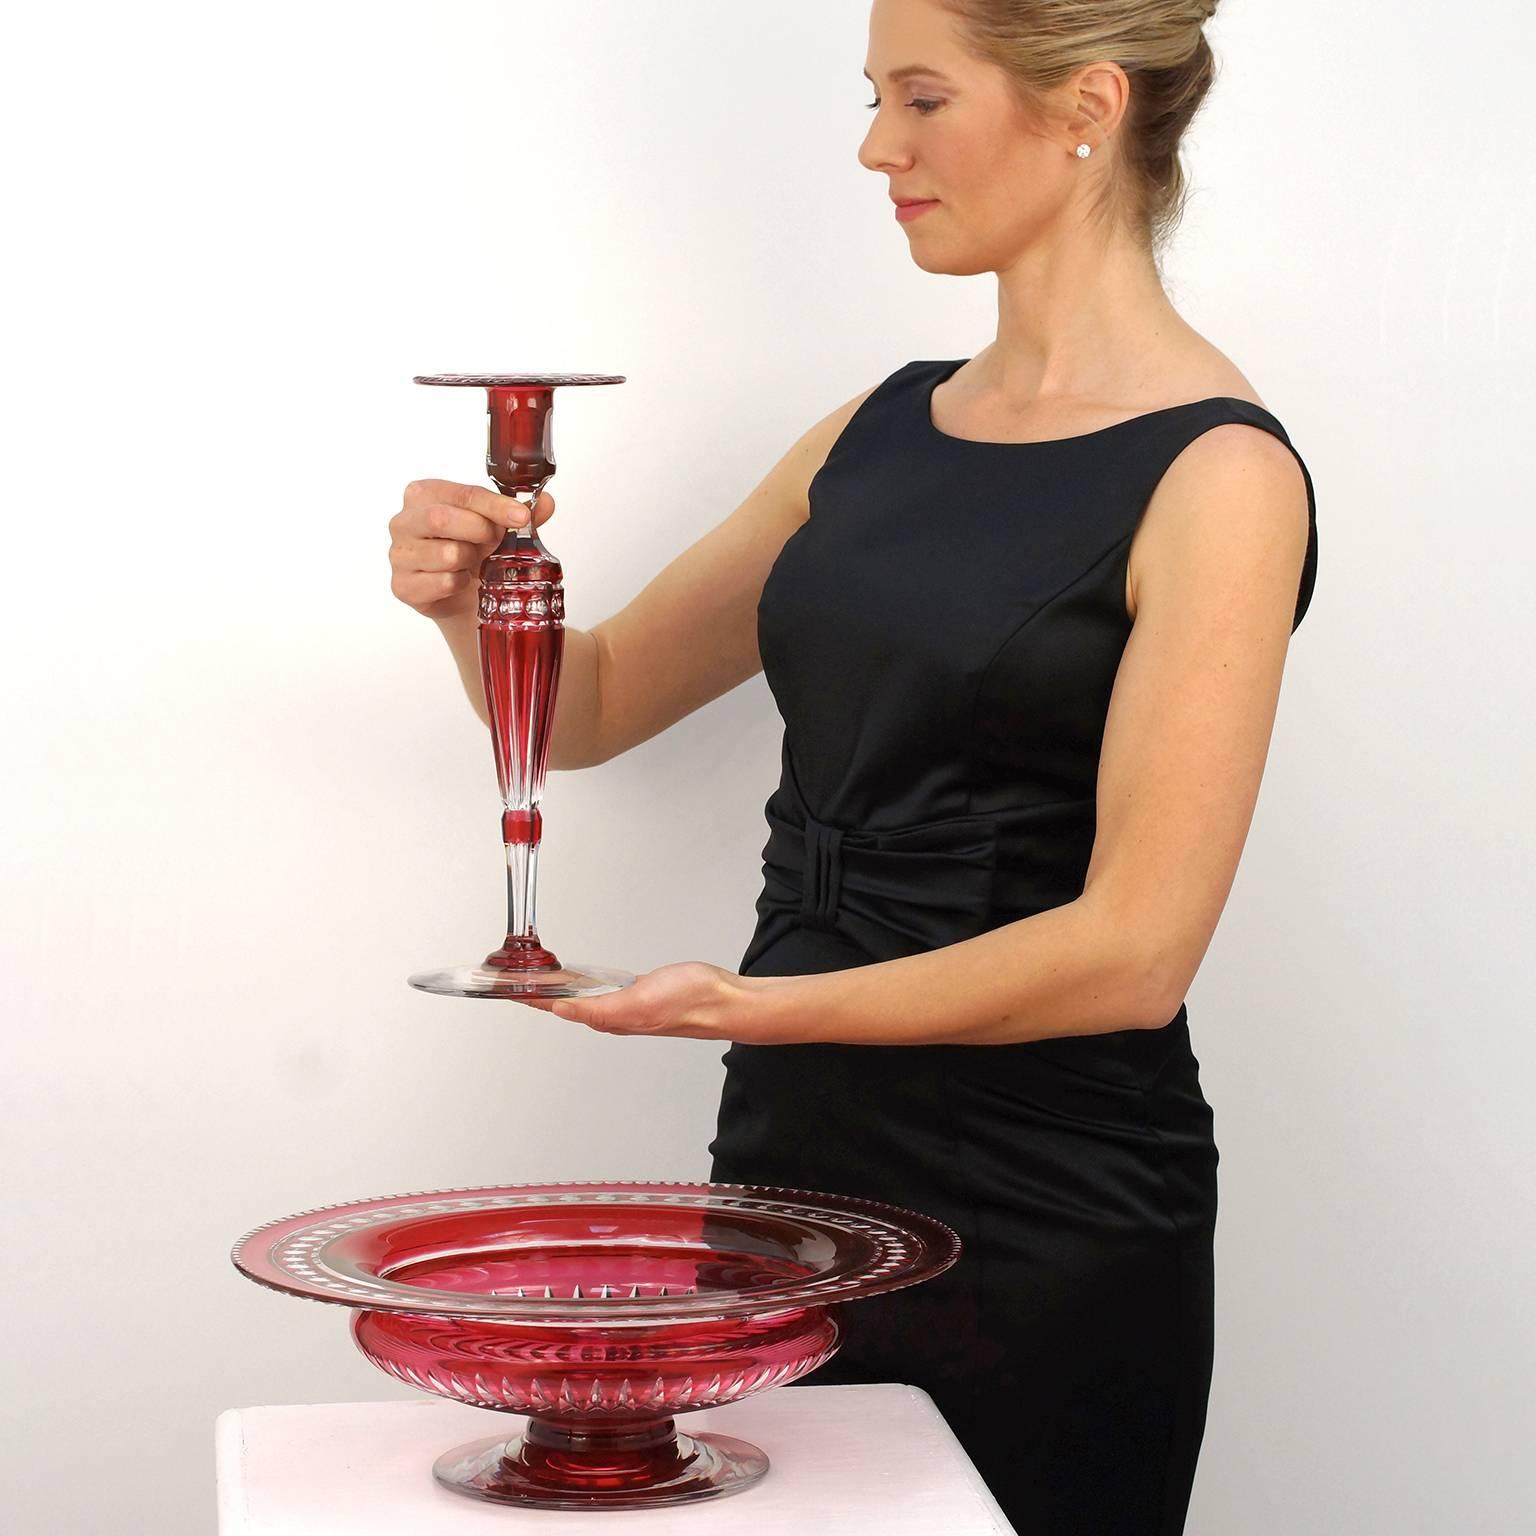 Circa 1930s, by Val St. Lambert, Belgium. This elegant Val St. Lambert creation features a stunning centerpiece bowl and four striking candlesticks, all exquisitely hand-cut in cranberry cased glass. The footed bowl is massive at 15 ¾ inches in